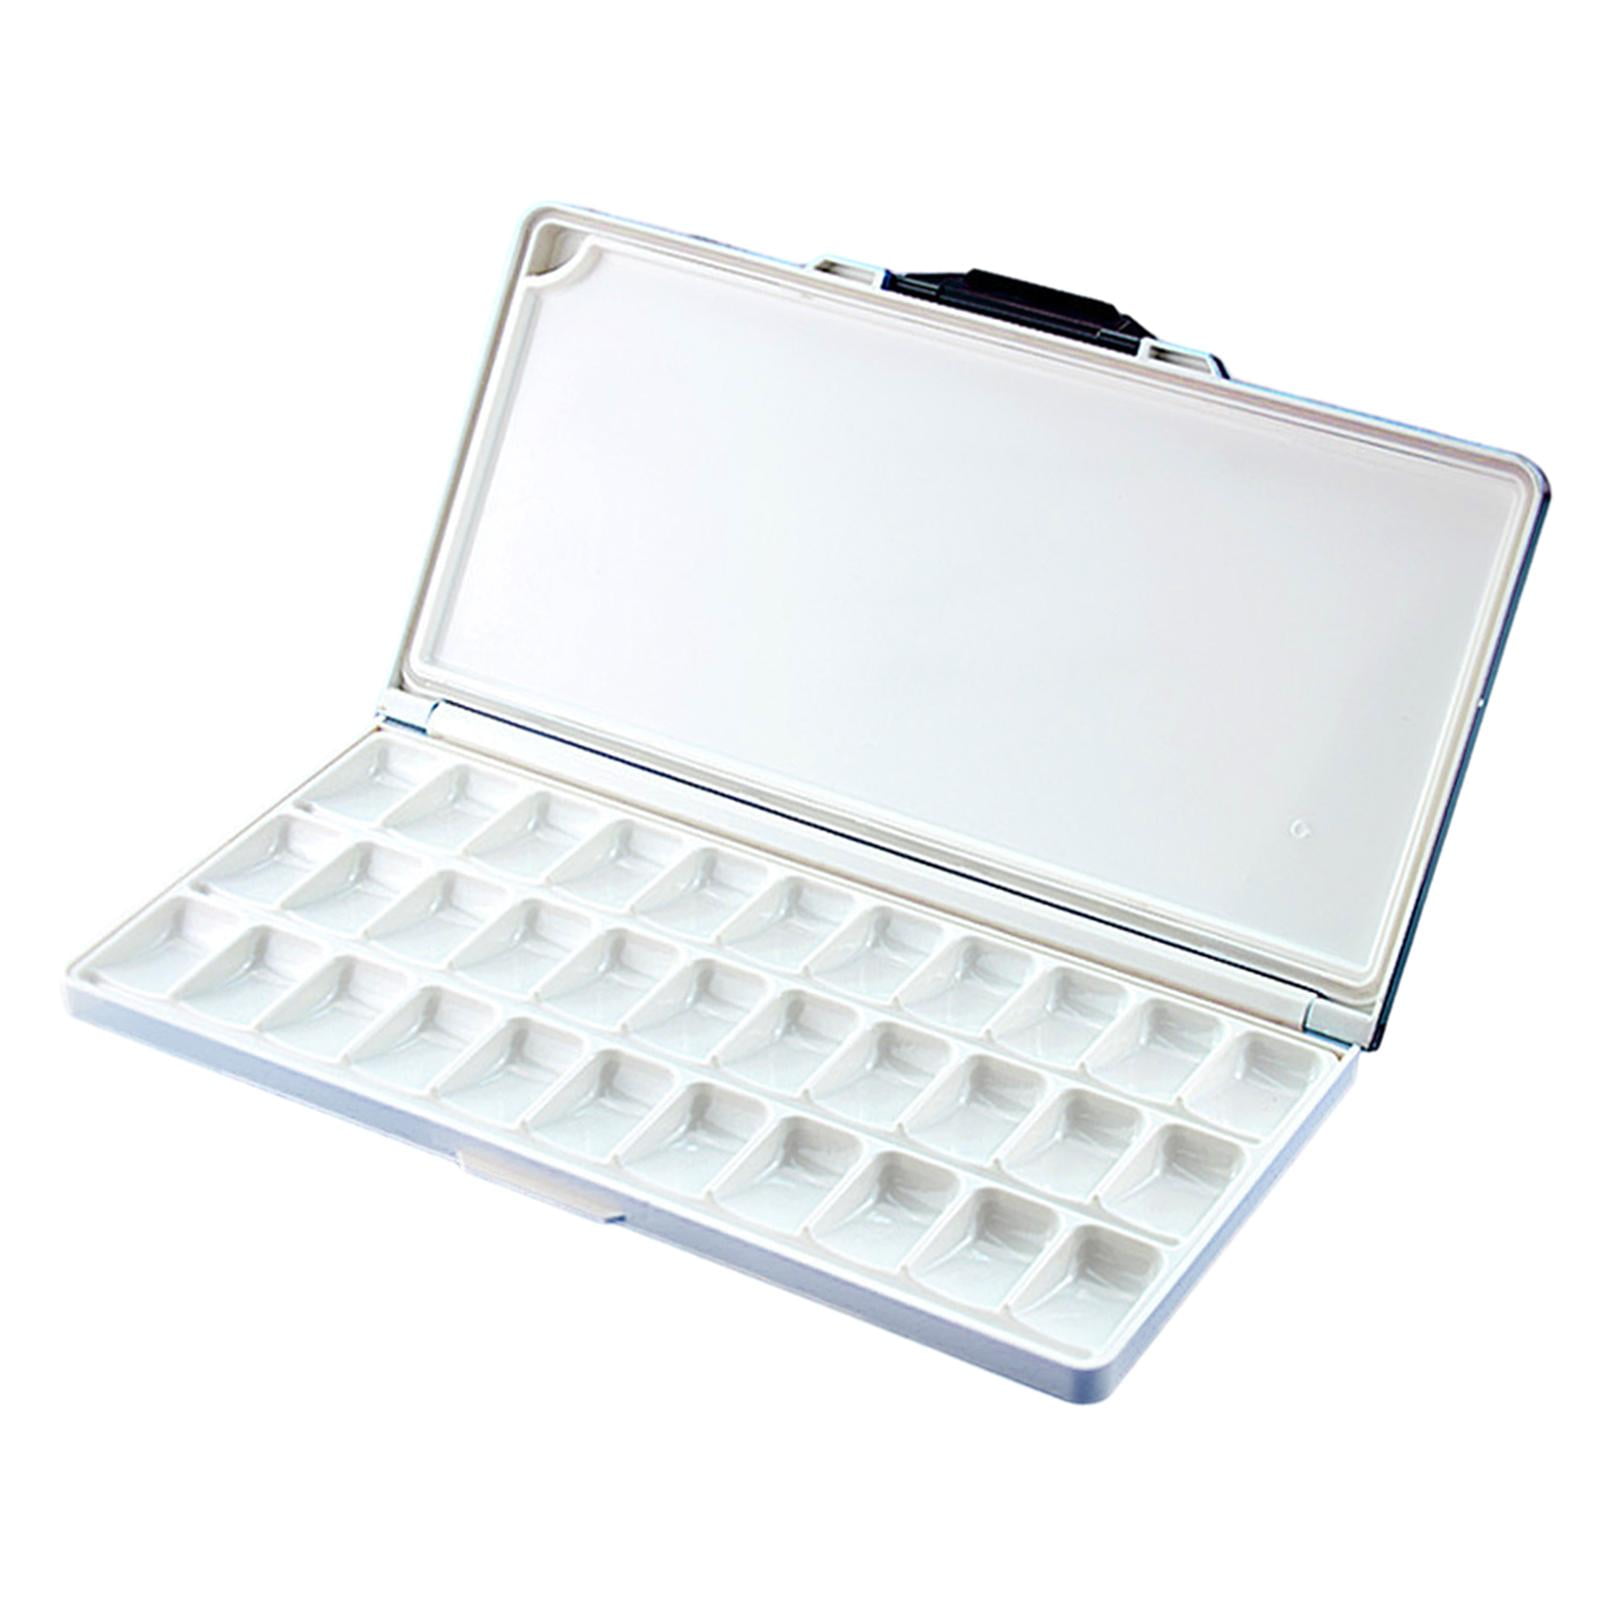  30 Compartments Plastic Paint Palette with Lid, Airtight  Leakproof Watercolor Palette for Gouache, Acrylic and Oil